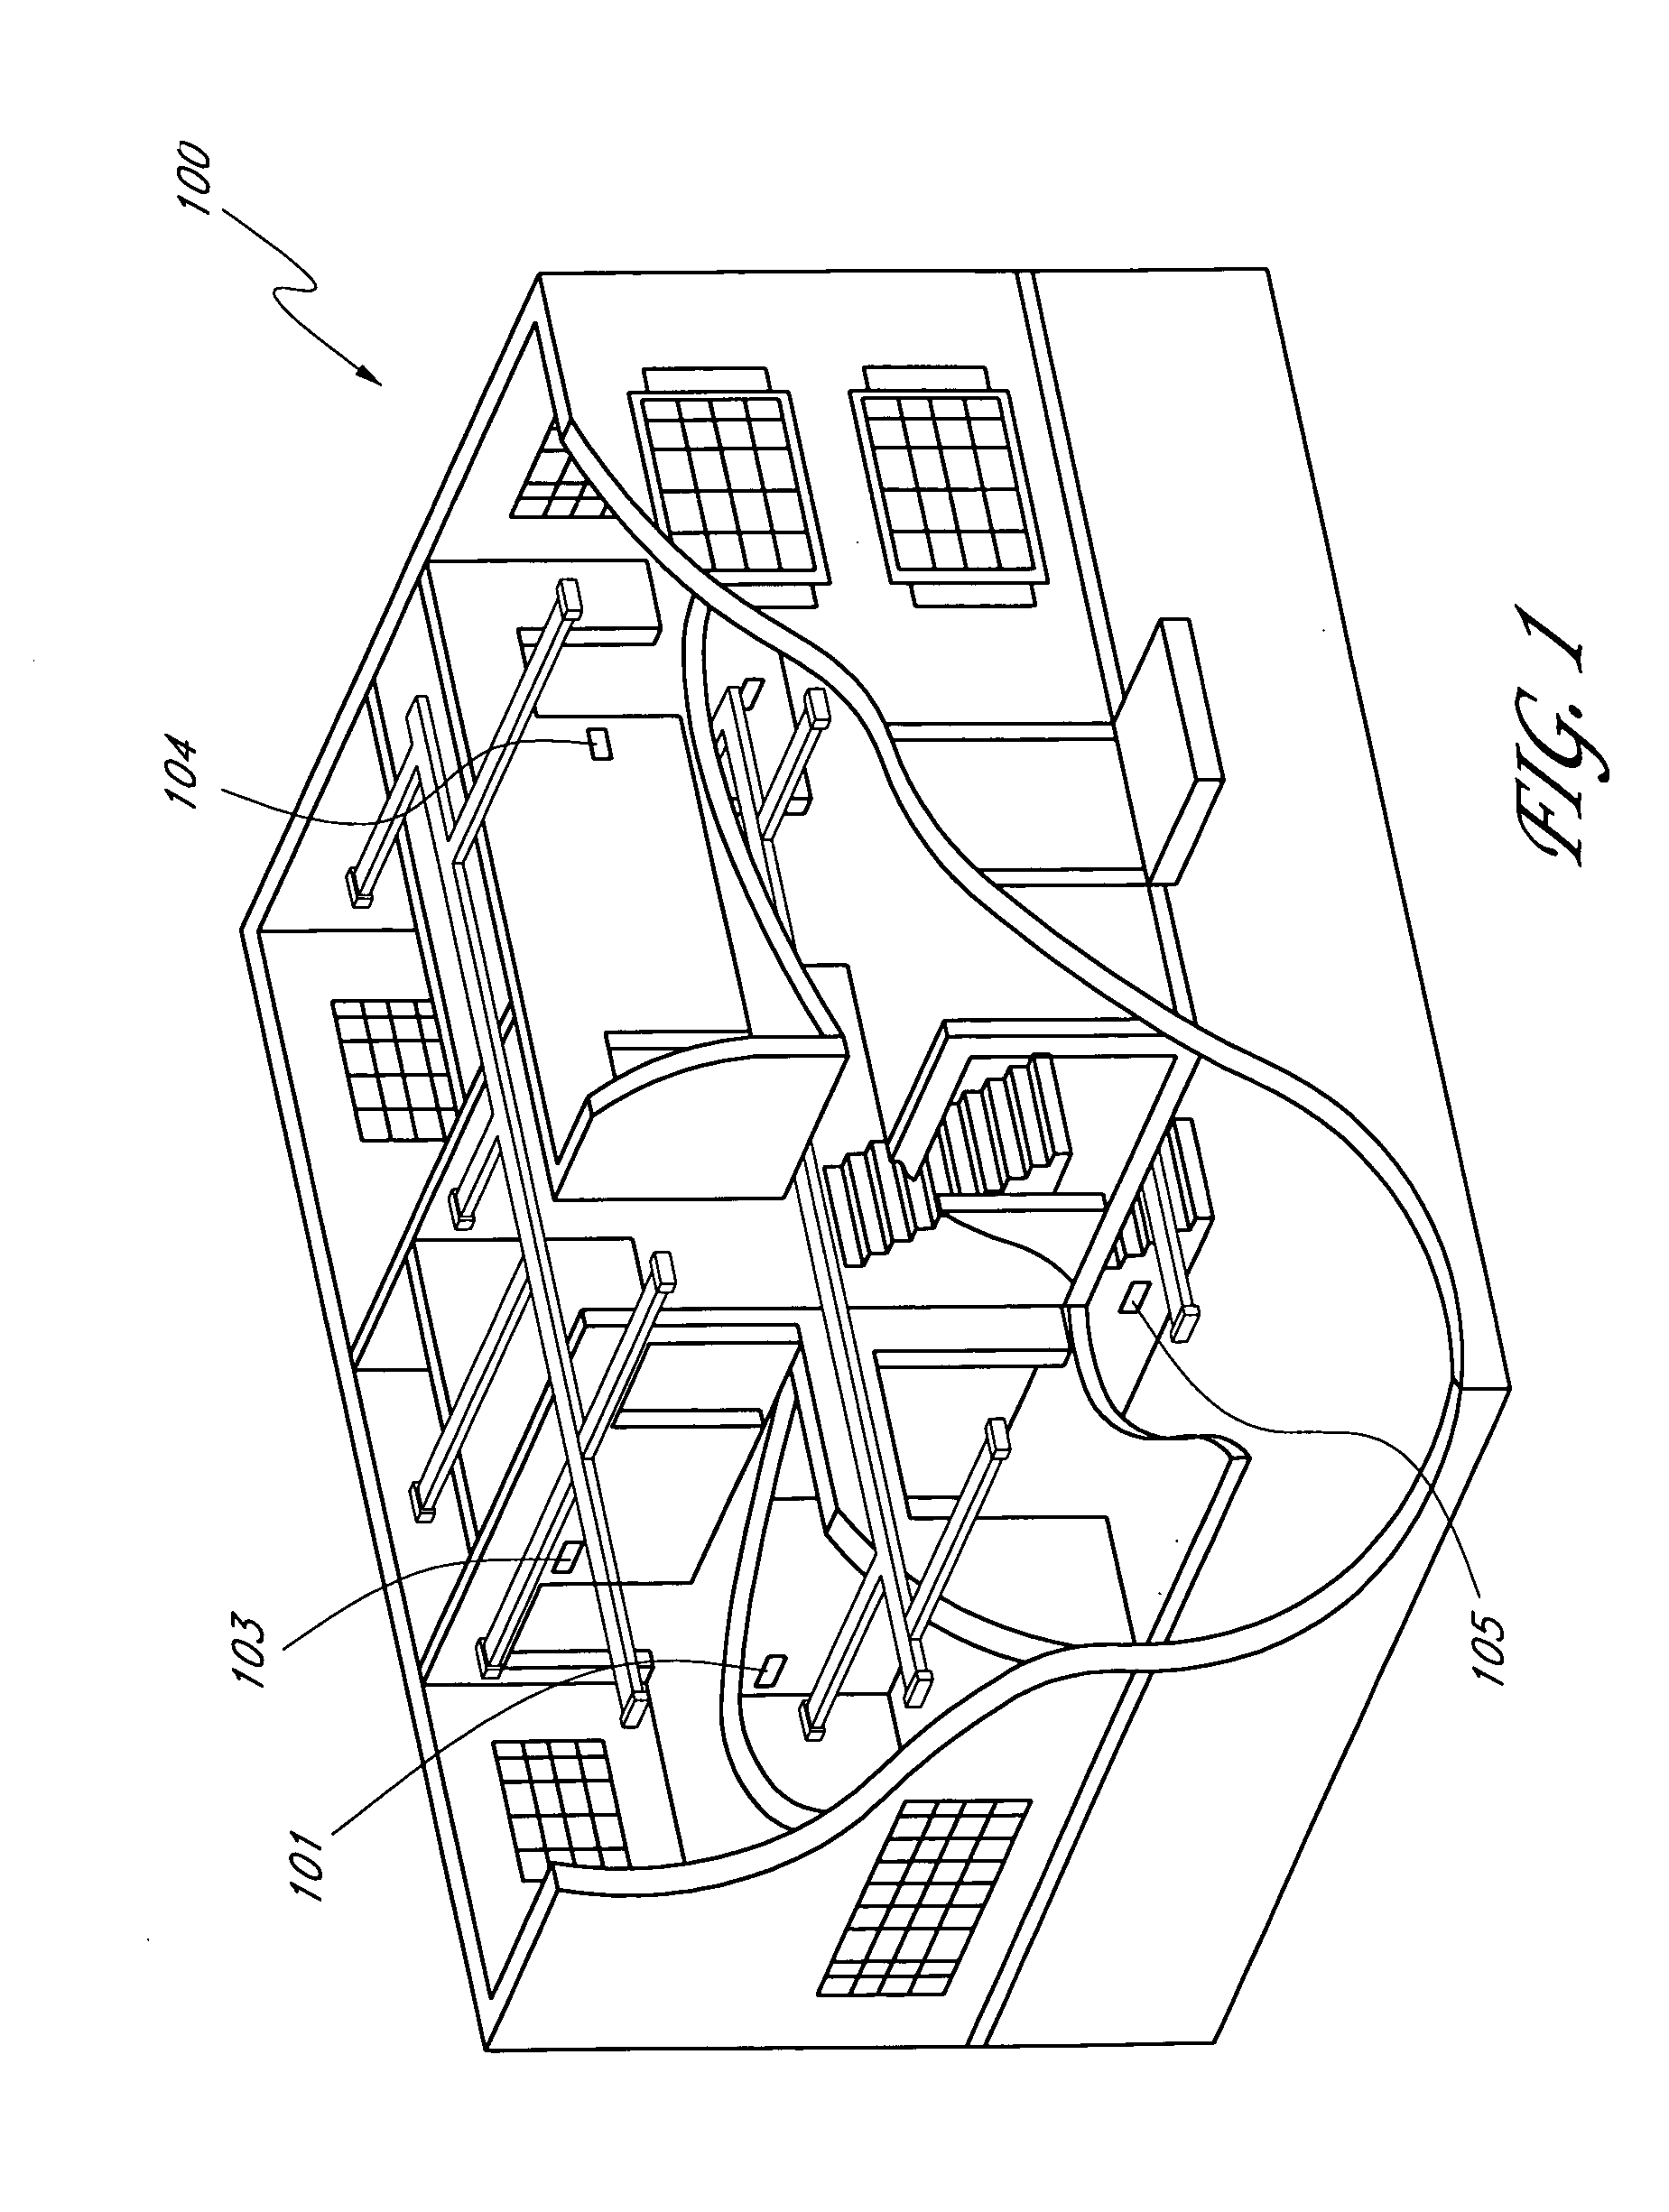 System and method for zone heating and cooling